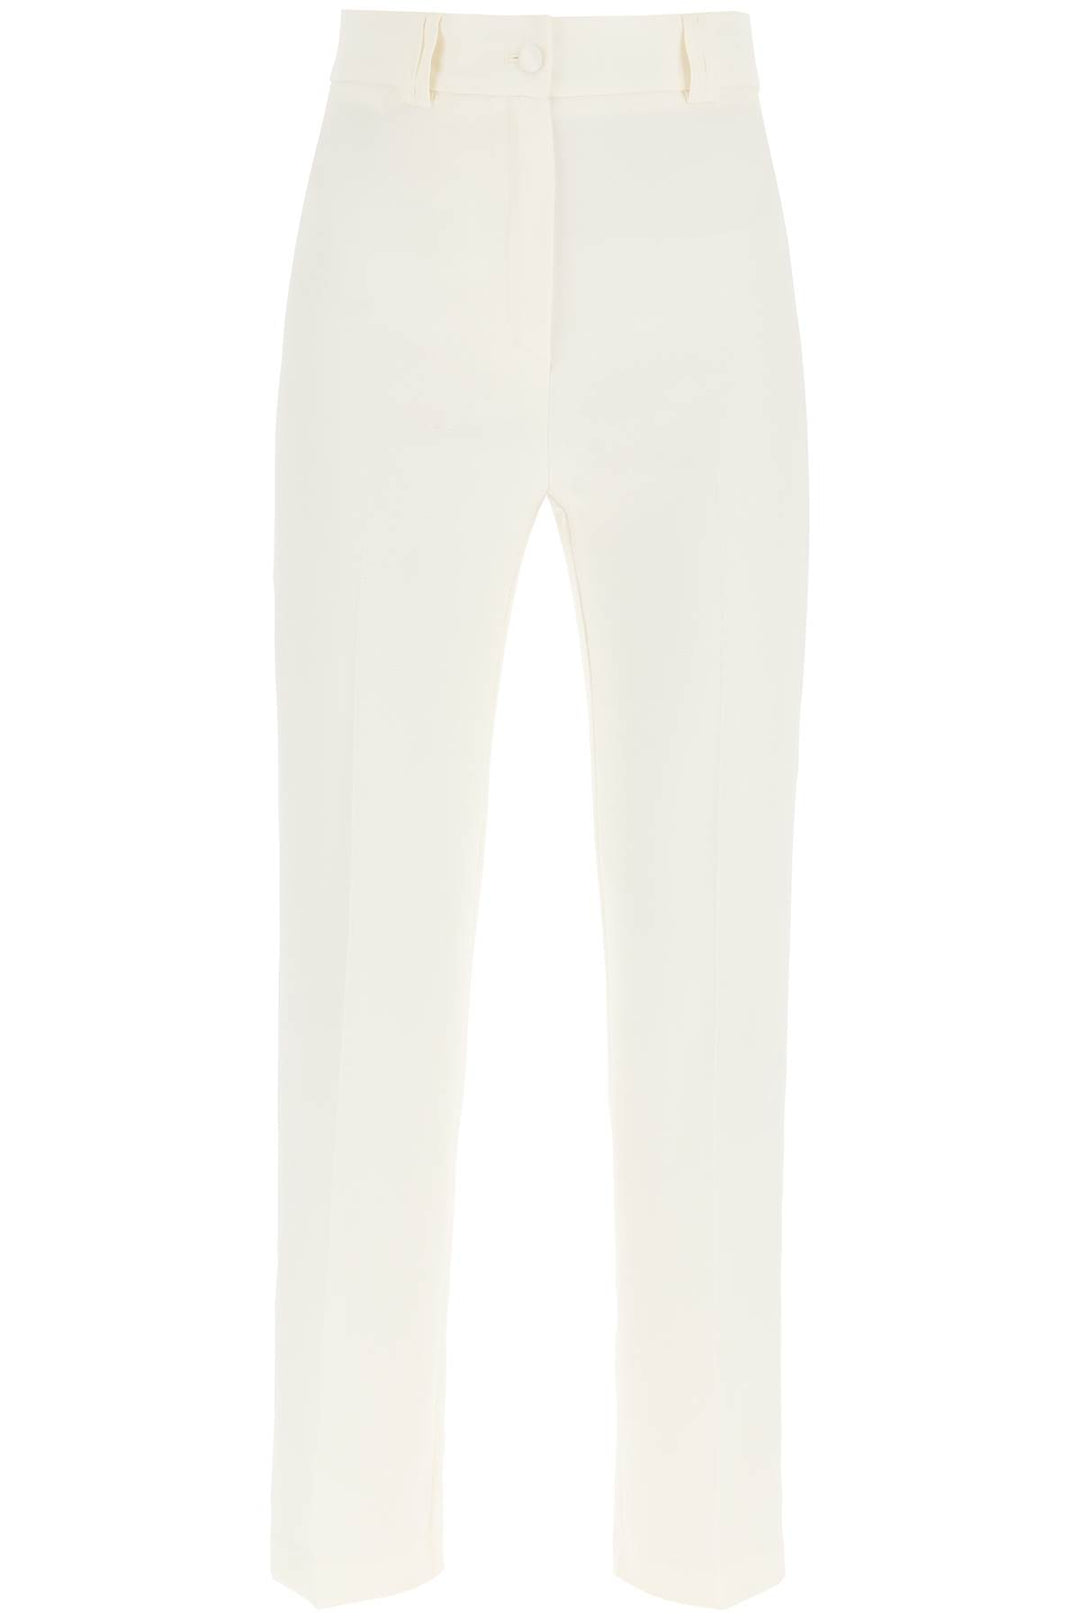 Pantaloni 'Loulou' In Cady - Hebe Studio - Donna